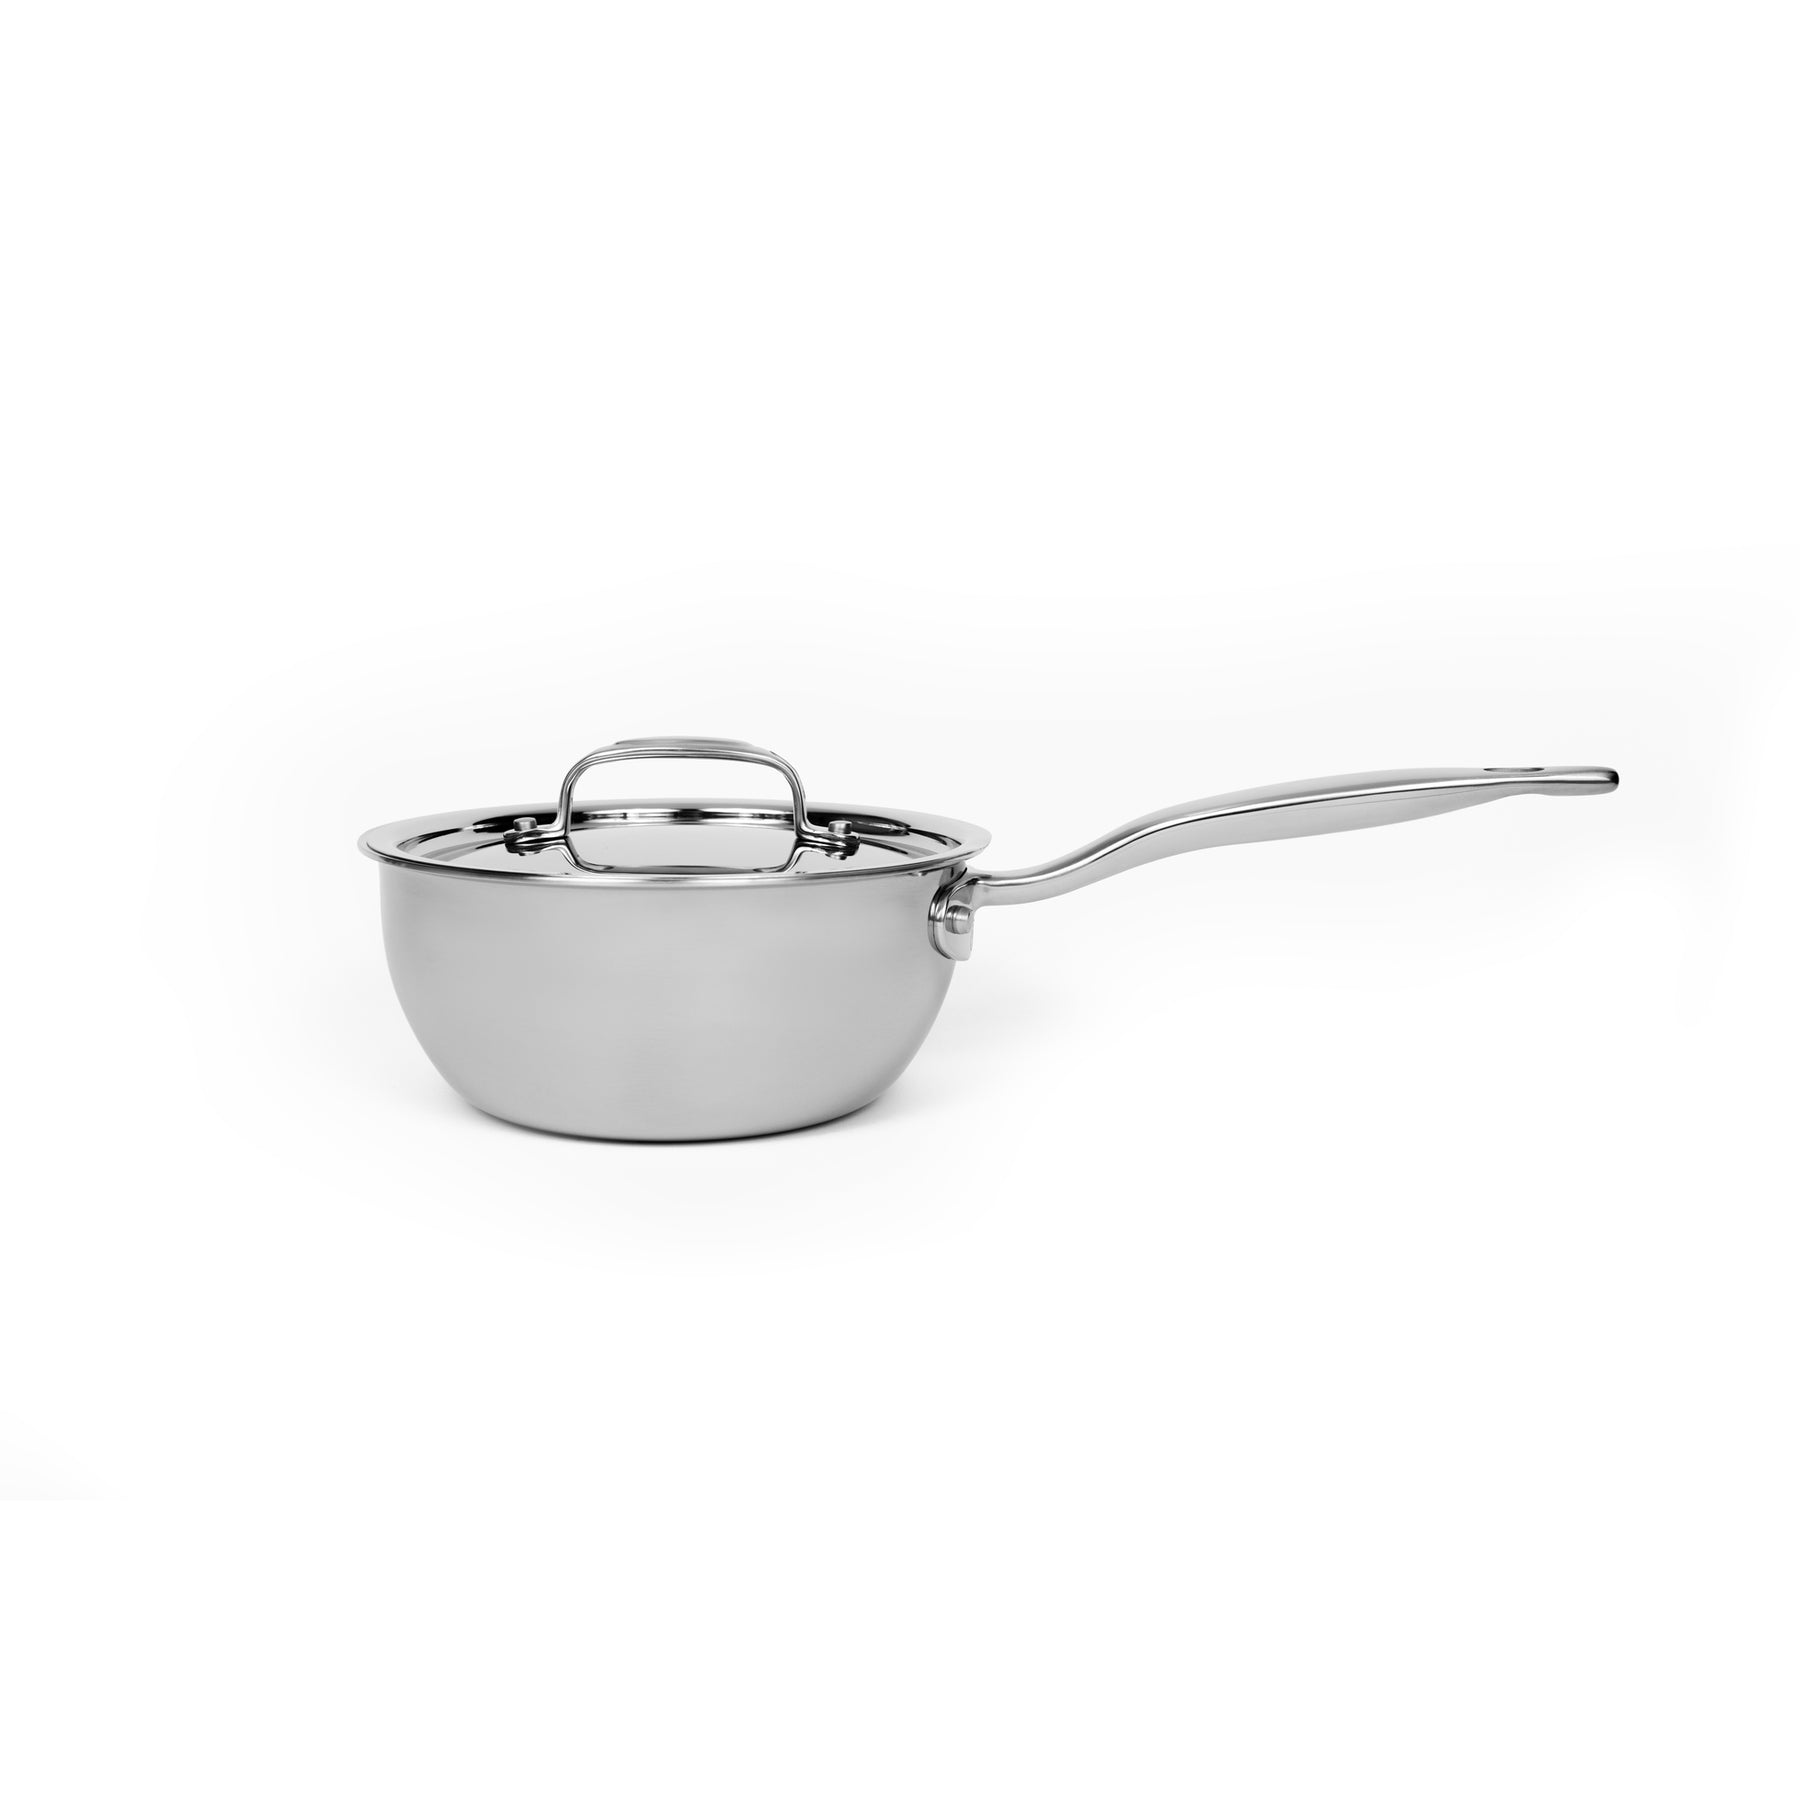 Heritage Steel Titanium Series 4 Quart Saucepan with Lid, 5-Ply Clad  Stainless Steel Cookware with 316Ti, Made in USA